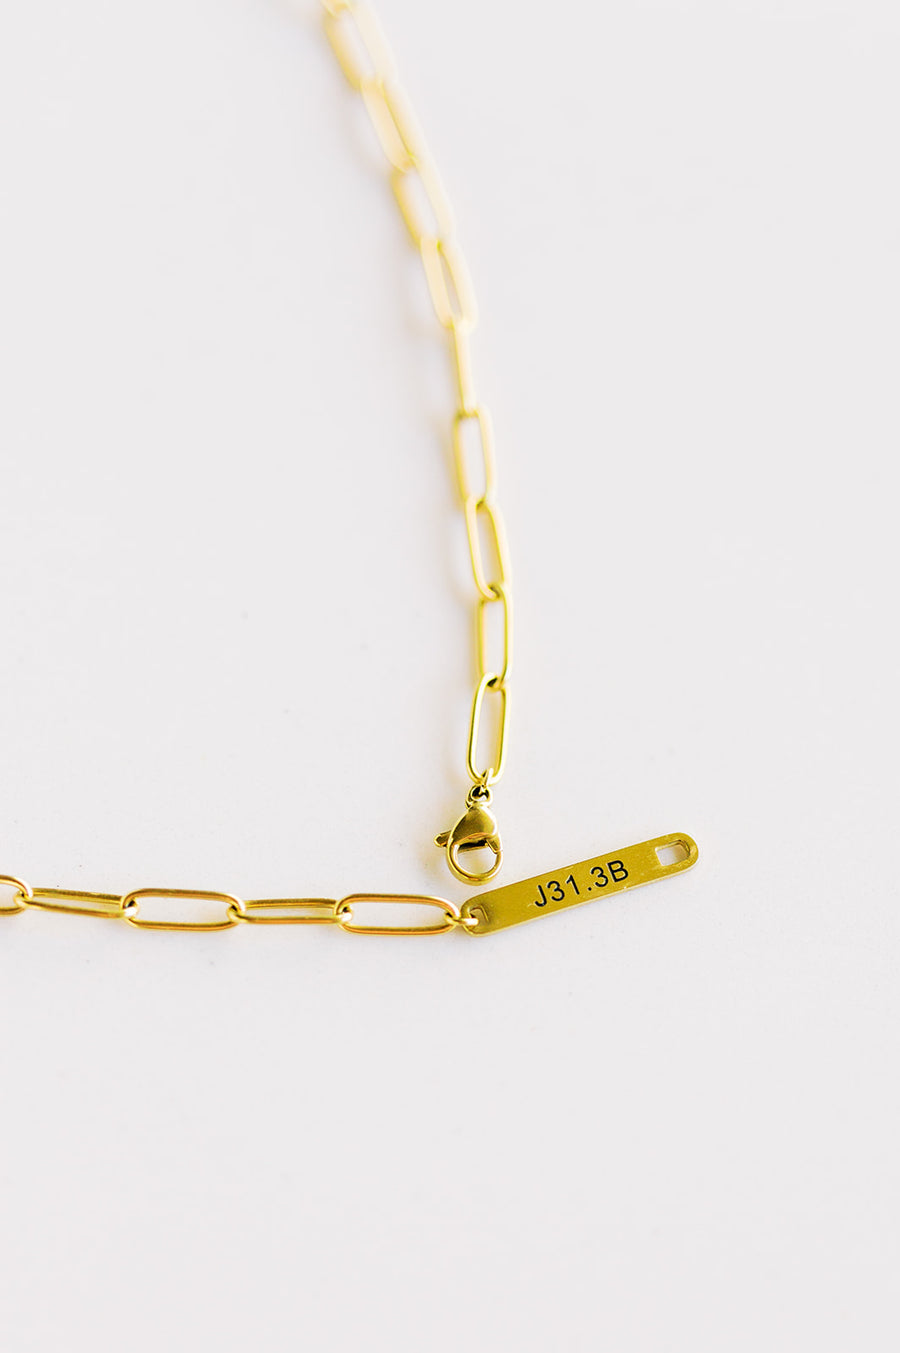 Everlasting Love Paperclip Necklace